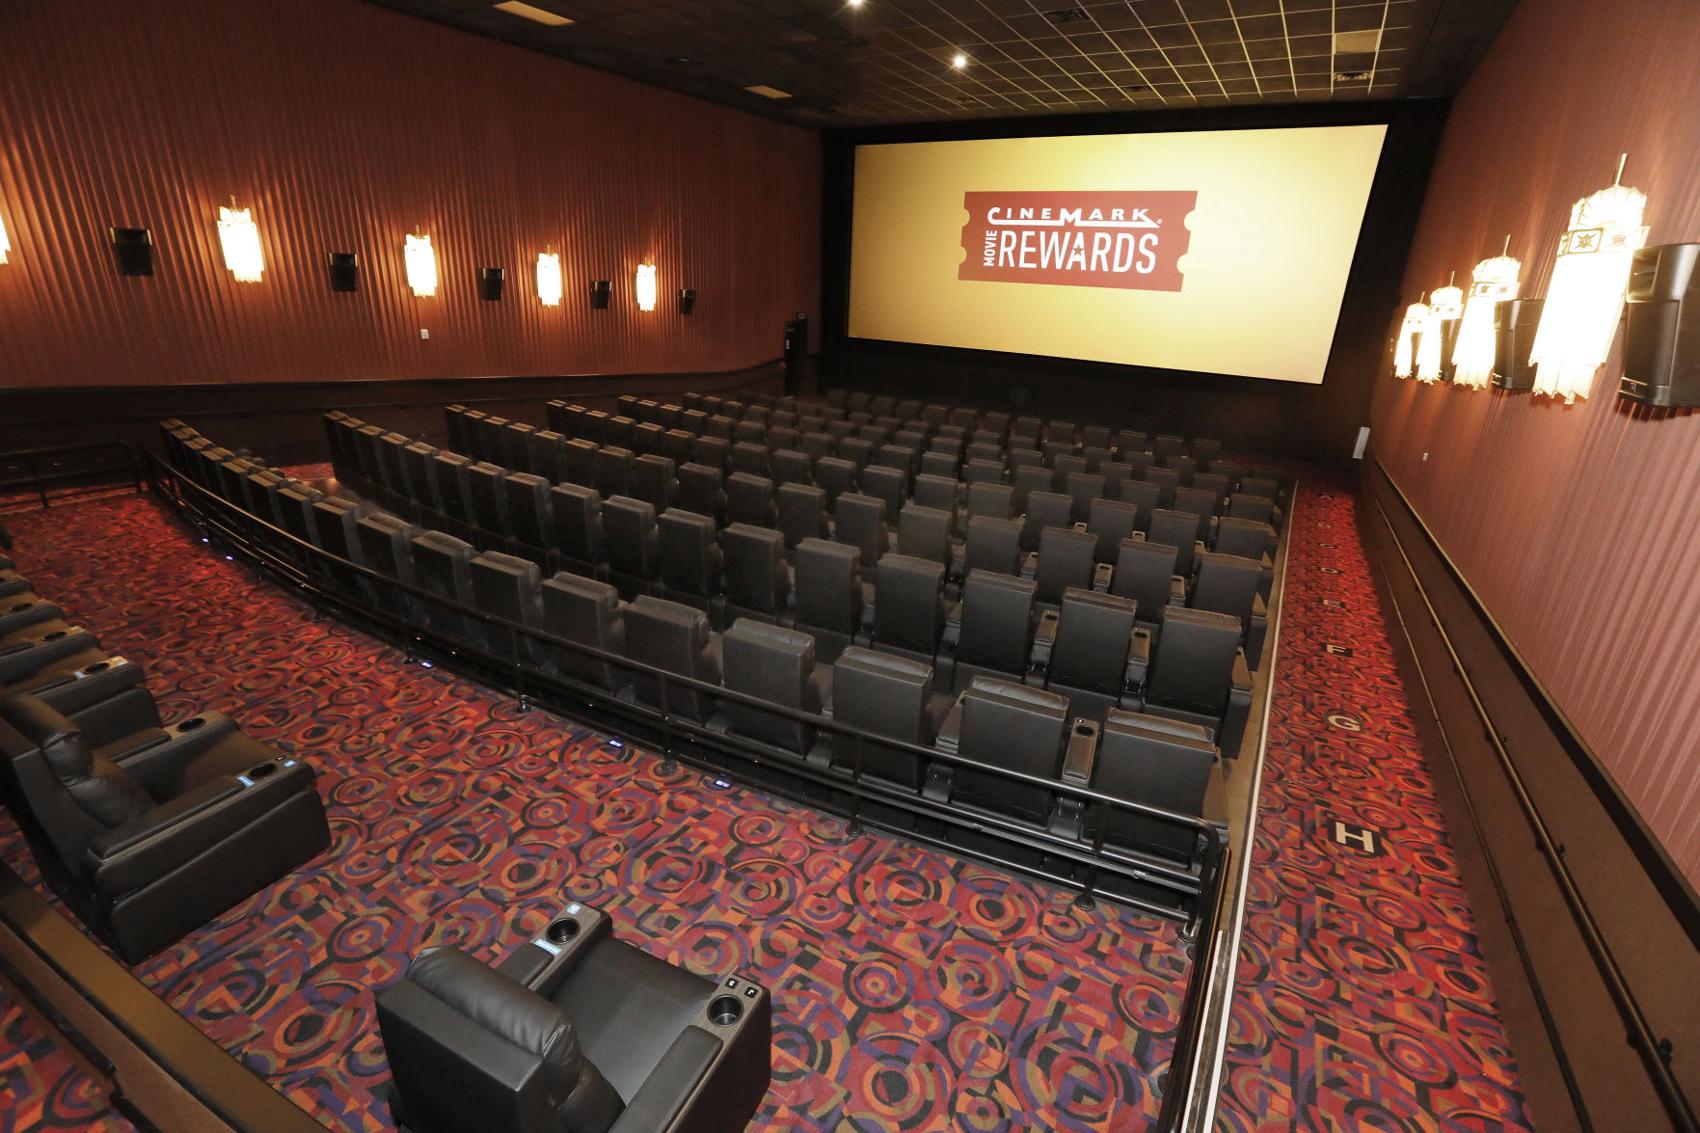 Cinemark Plano 10 reopens fully renovated News